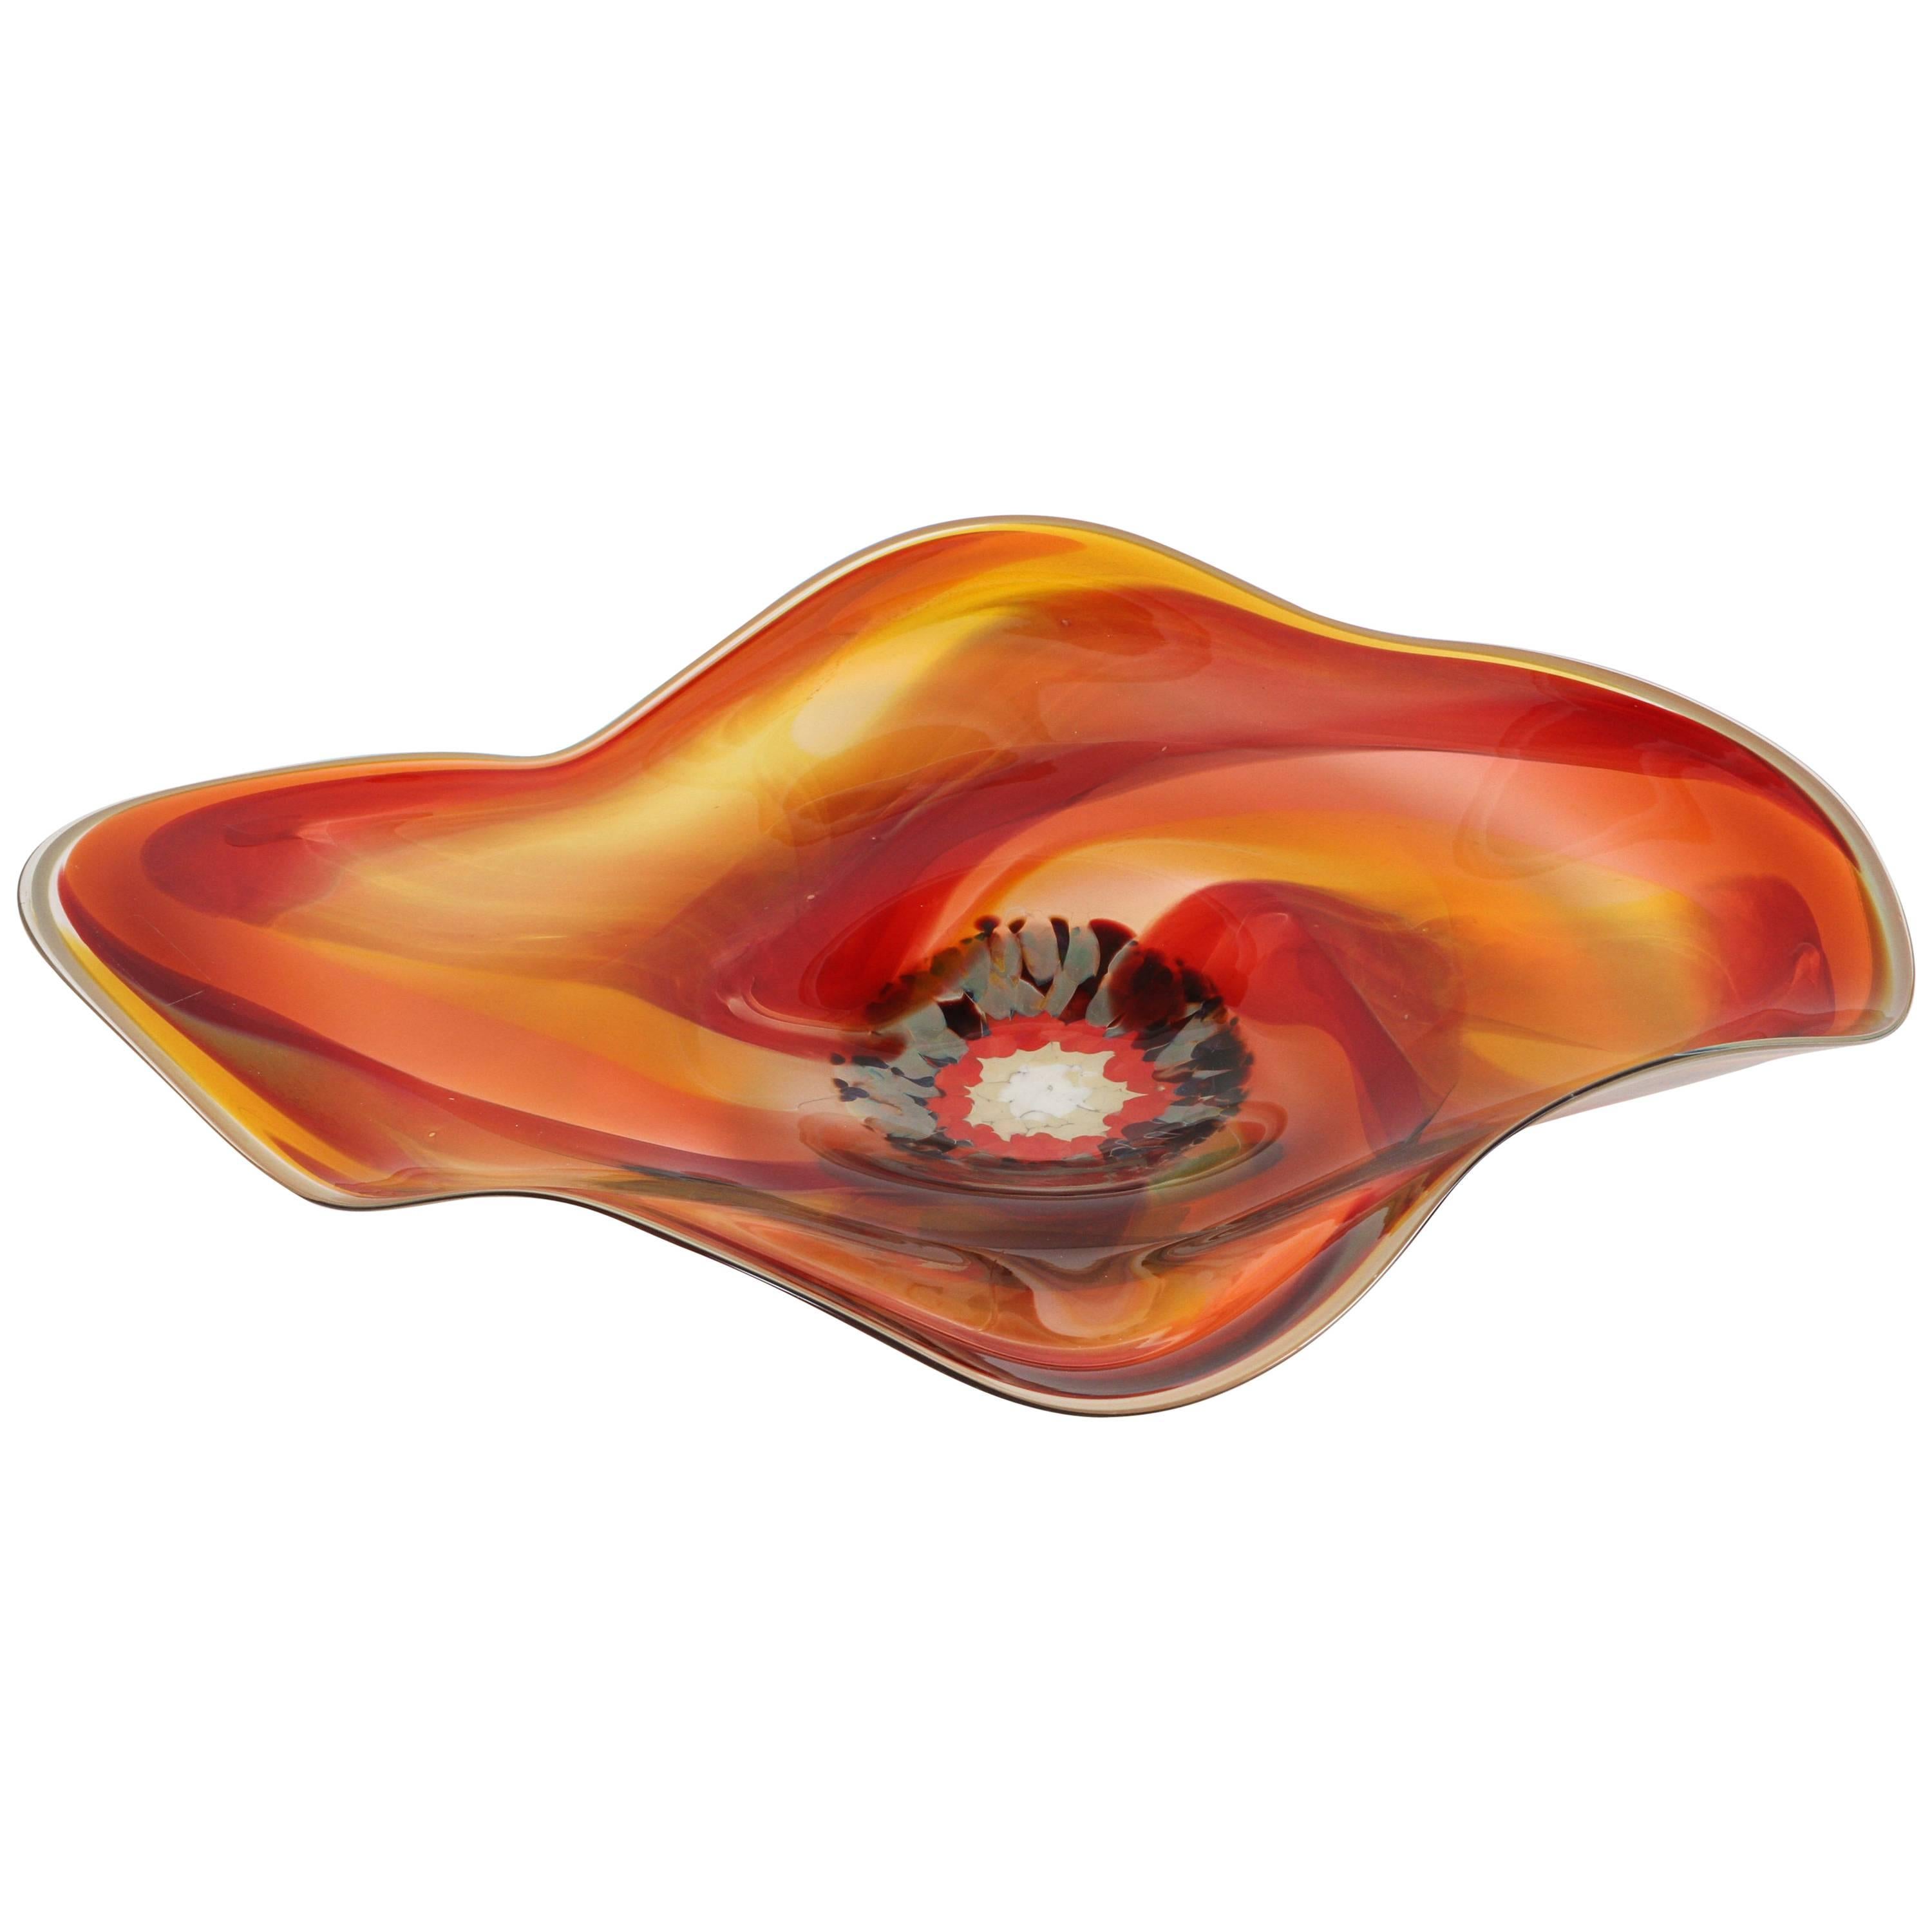 Large decorative handblown Murano style art glass wall sculpture.
One of a kind commission. Handcrafted by Neder in 1999.
Earth tone colors edgy modern red and amber glass flower wall piece sculpture.
Handcrafted by Neder in 1999. Signed and